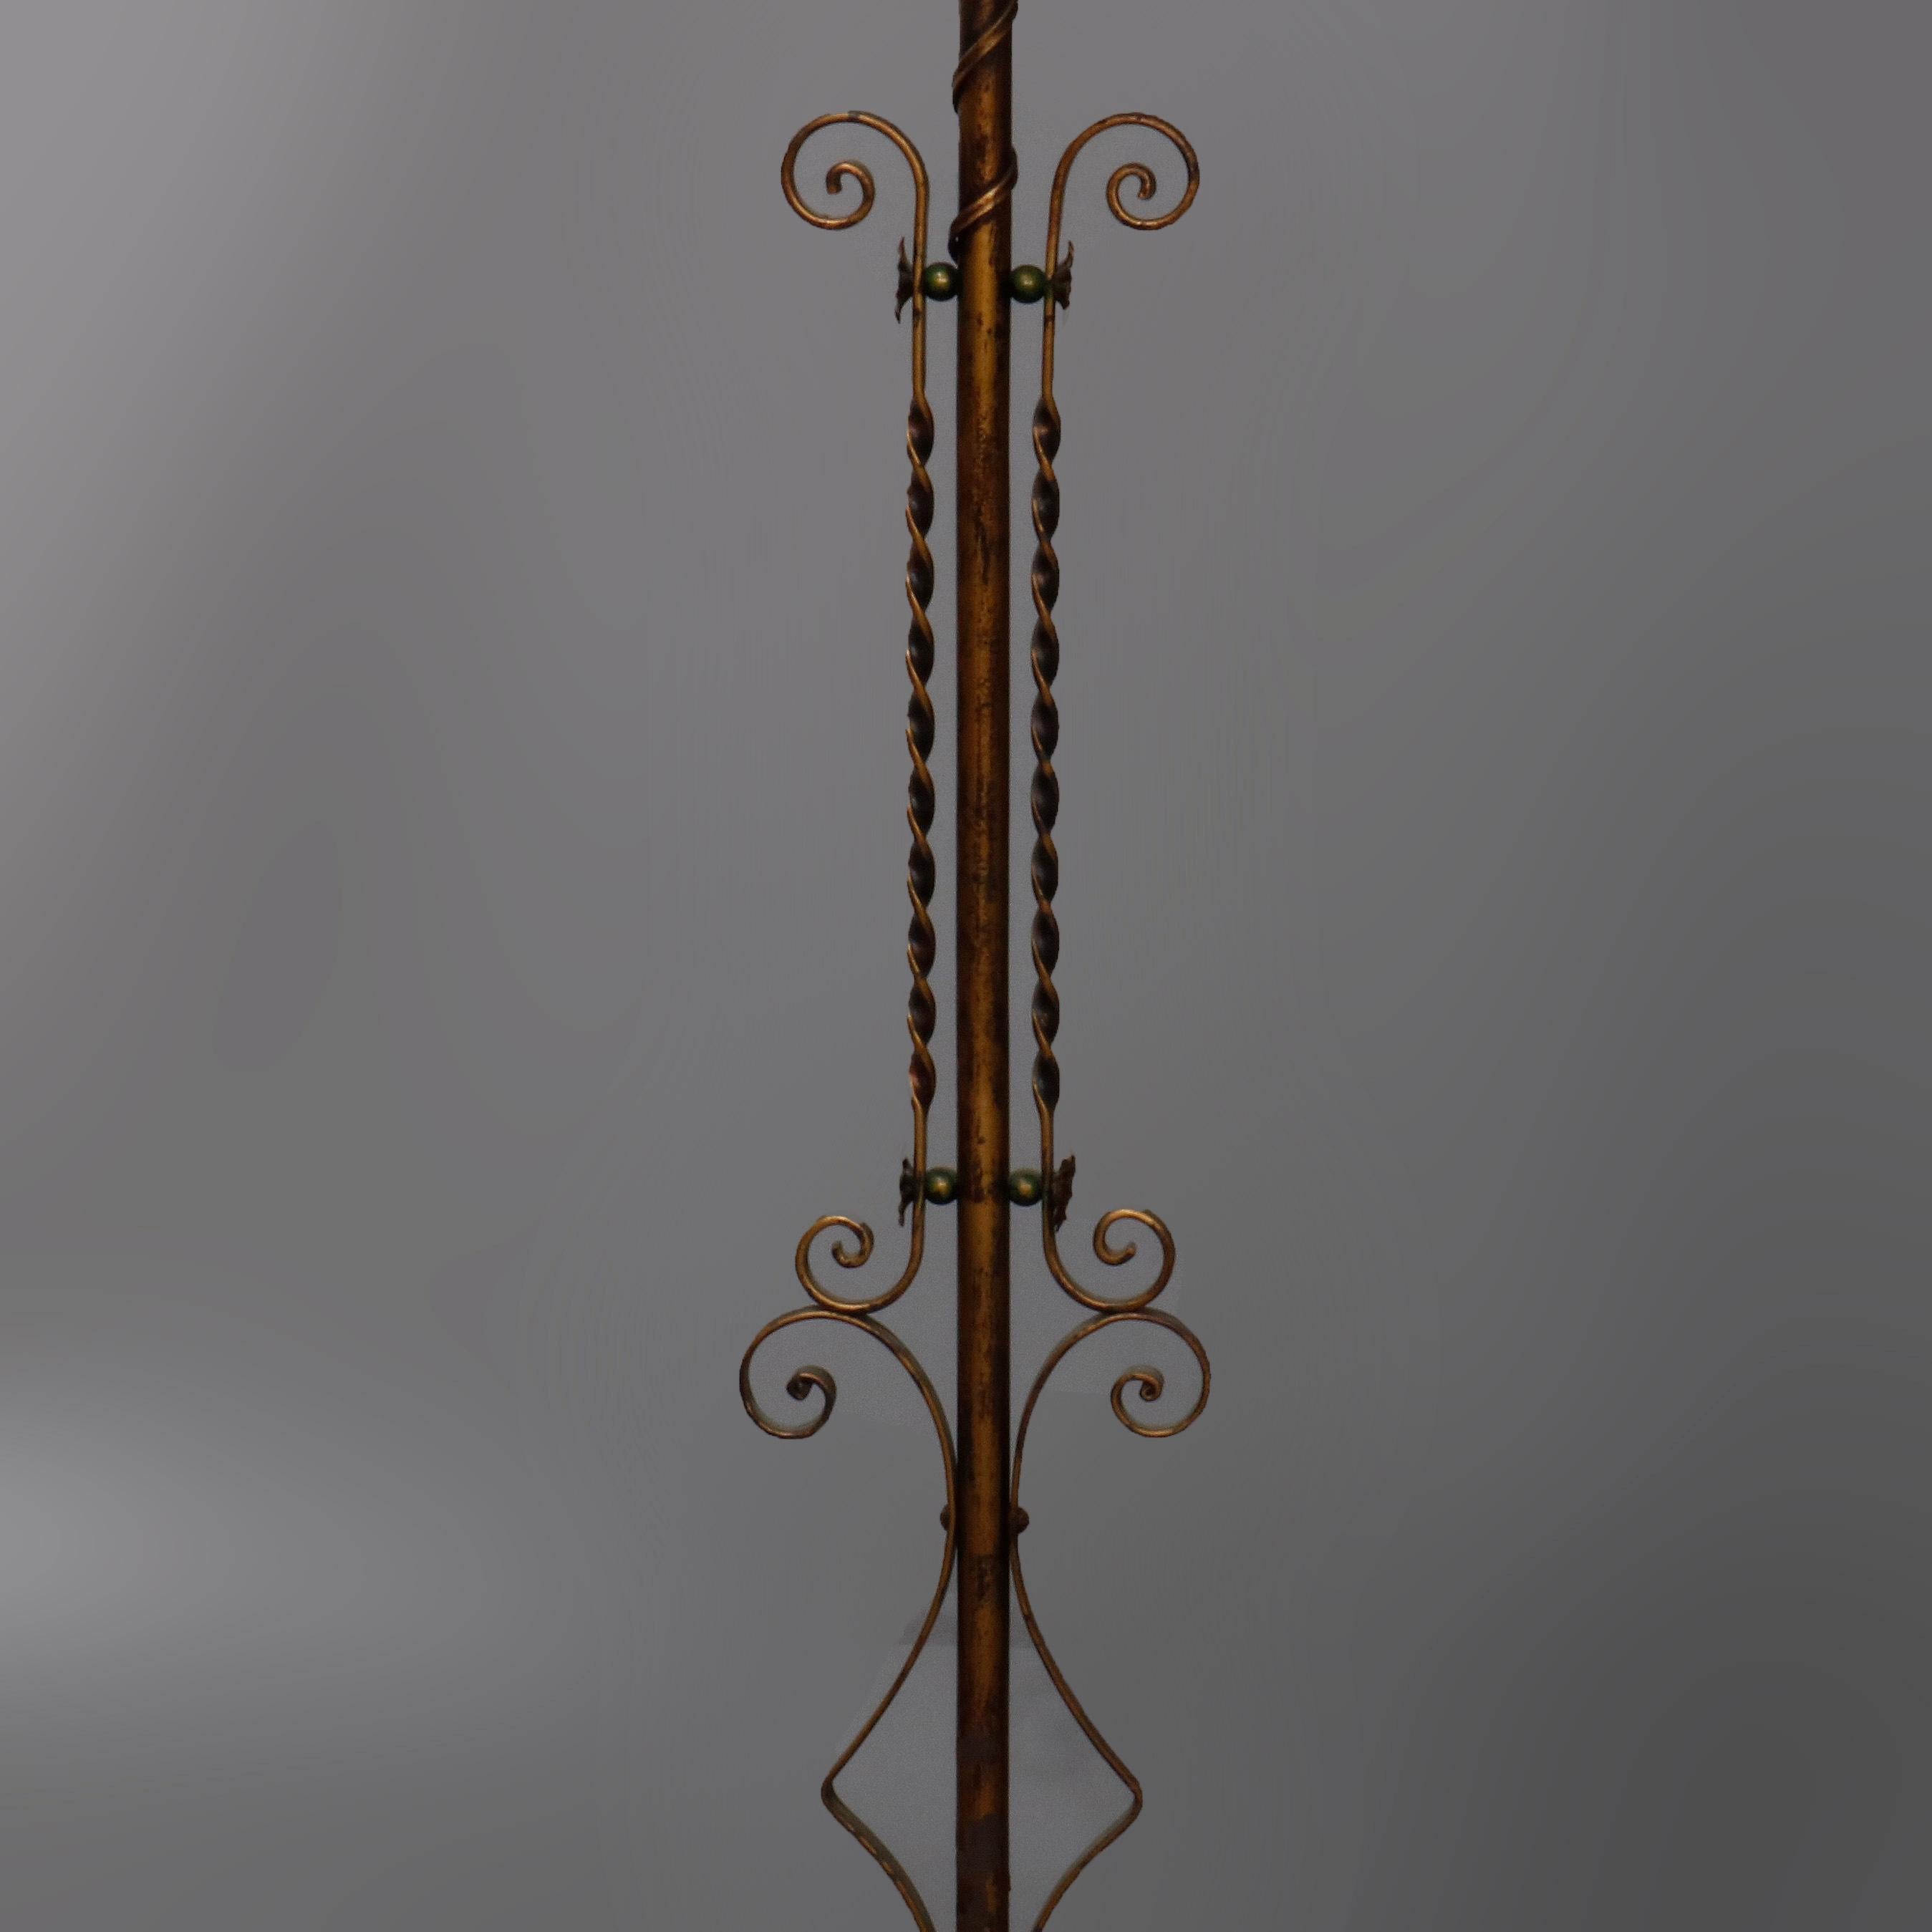 An antique Arts & Crafts floor lamp offers wrought iron construction with gilt finish, foliate and scroll accents, flanking twisted and scroll elements and goose neck terminating in a light with art glass shade, circa 1920

Measures: 58.5